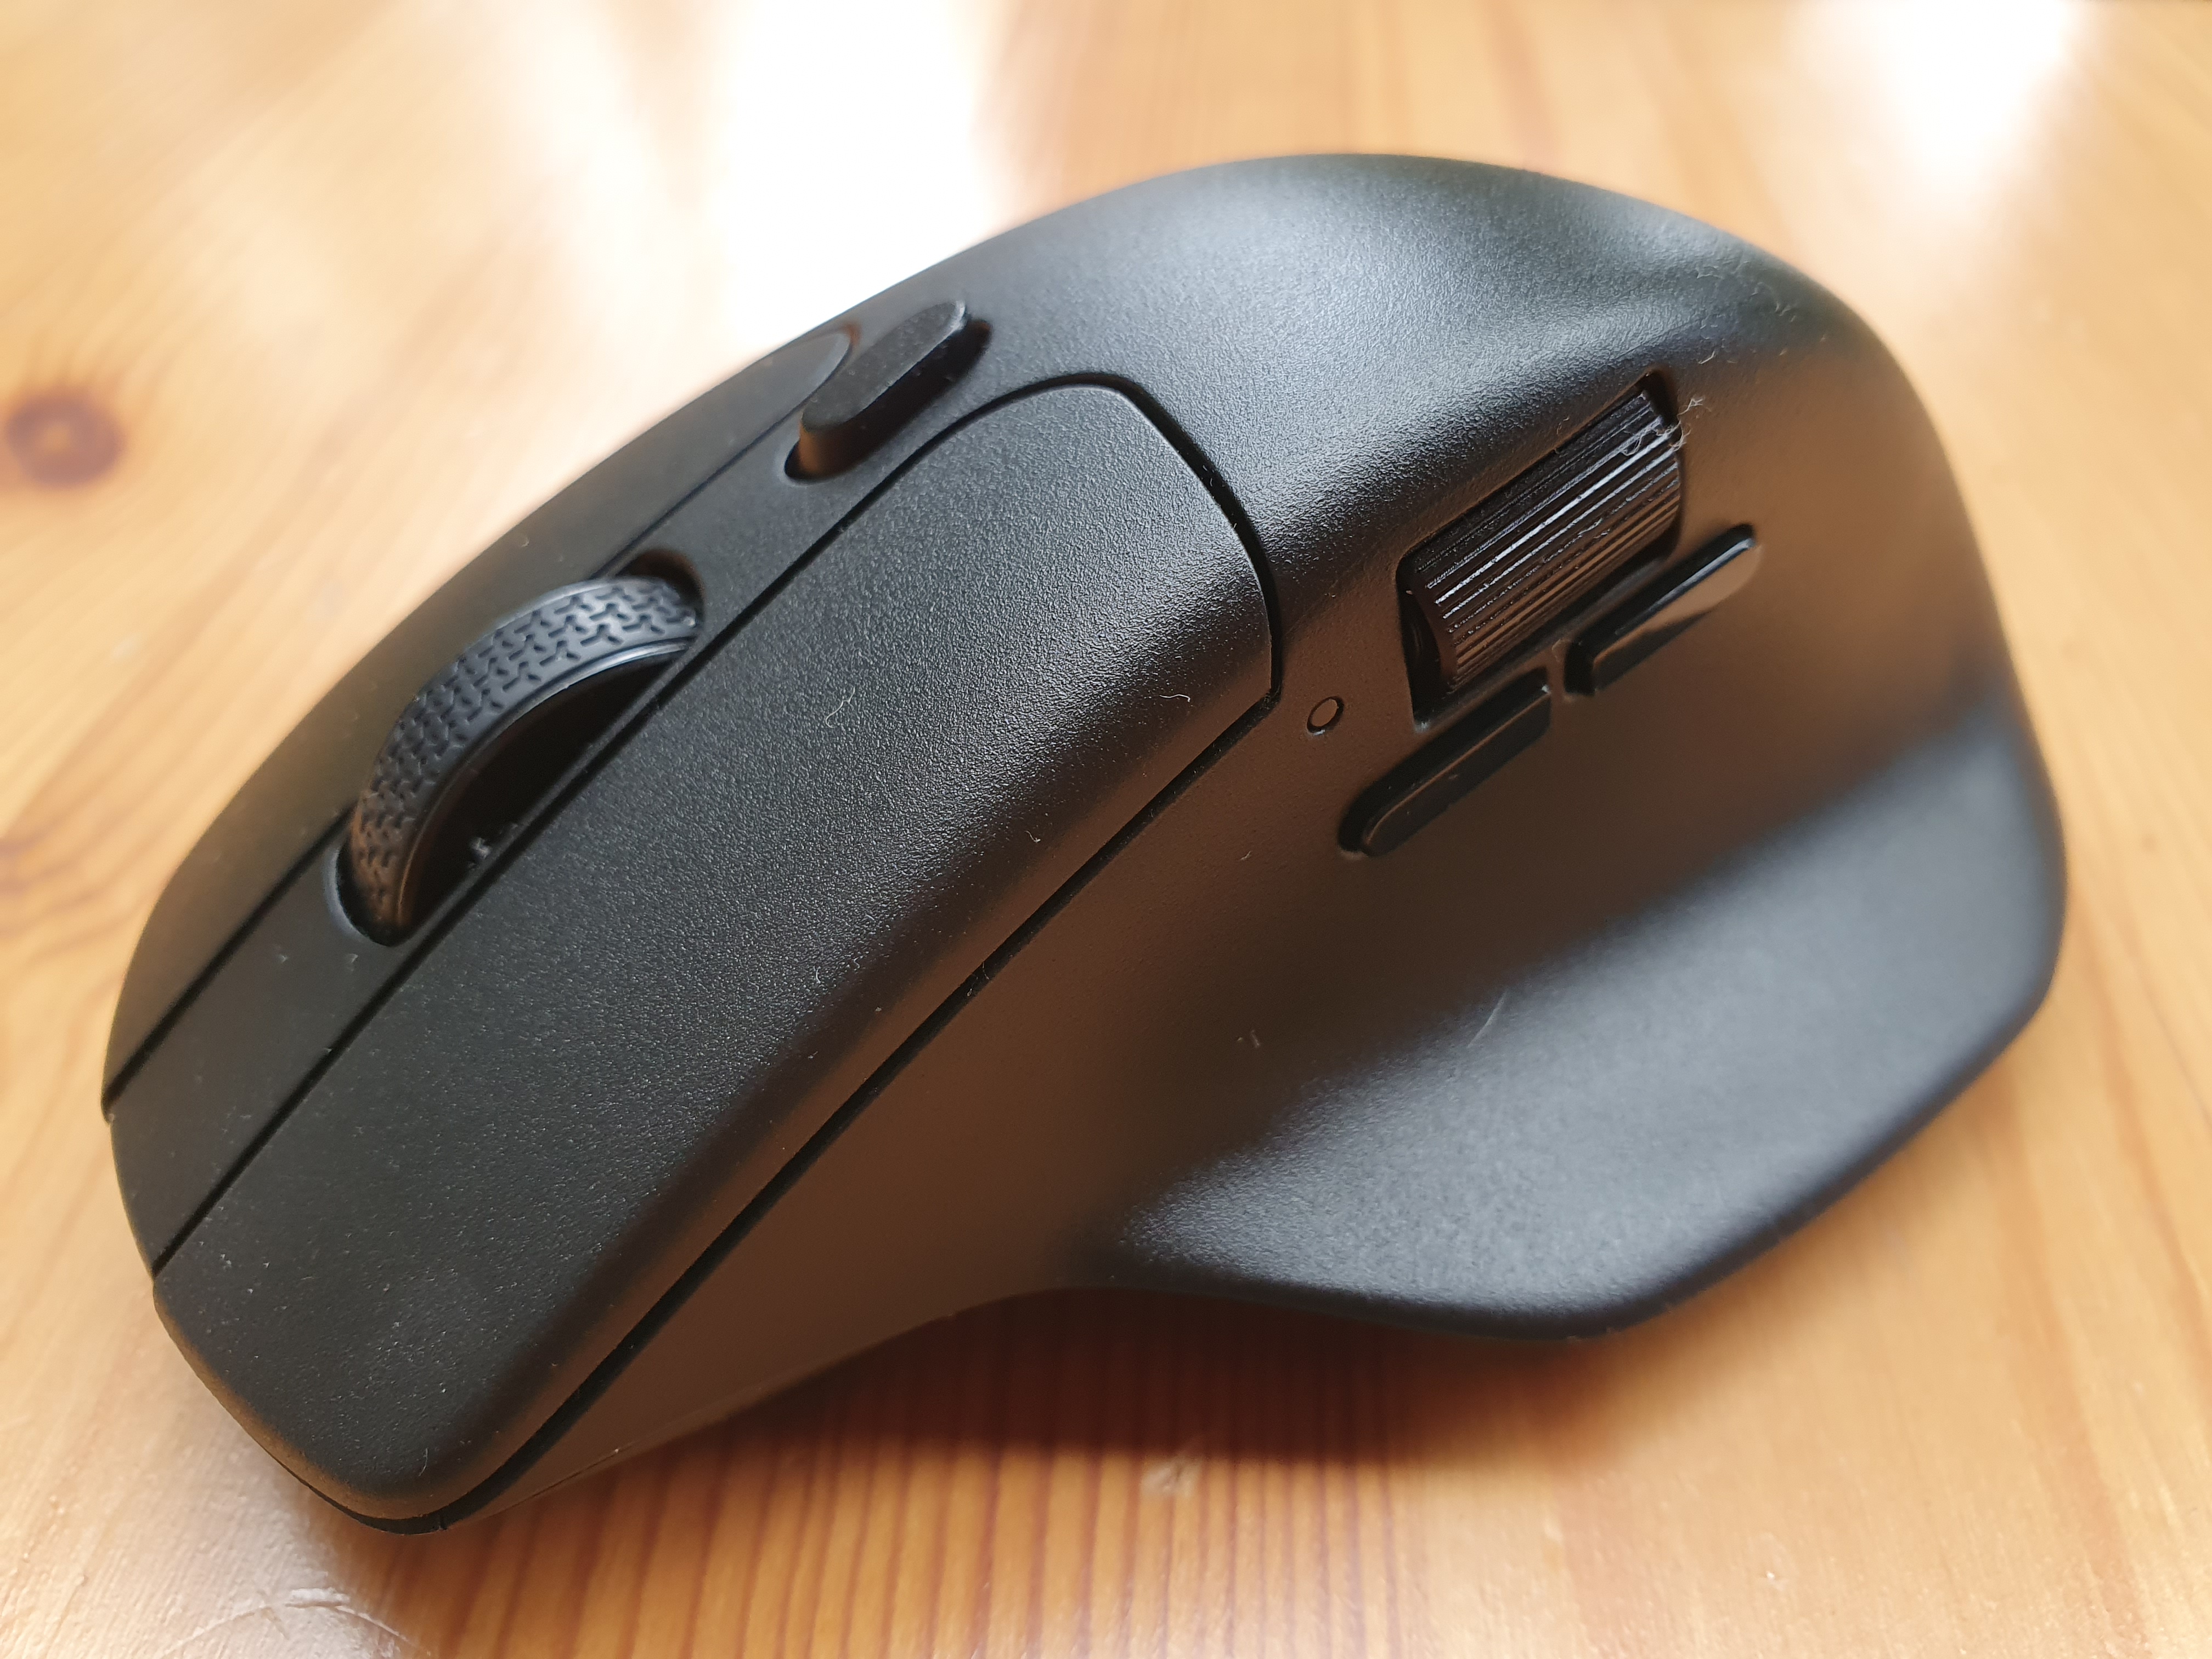 Keychron M6 Wireless - Best wireless gaming mouse runner-up